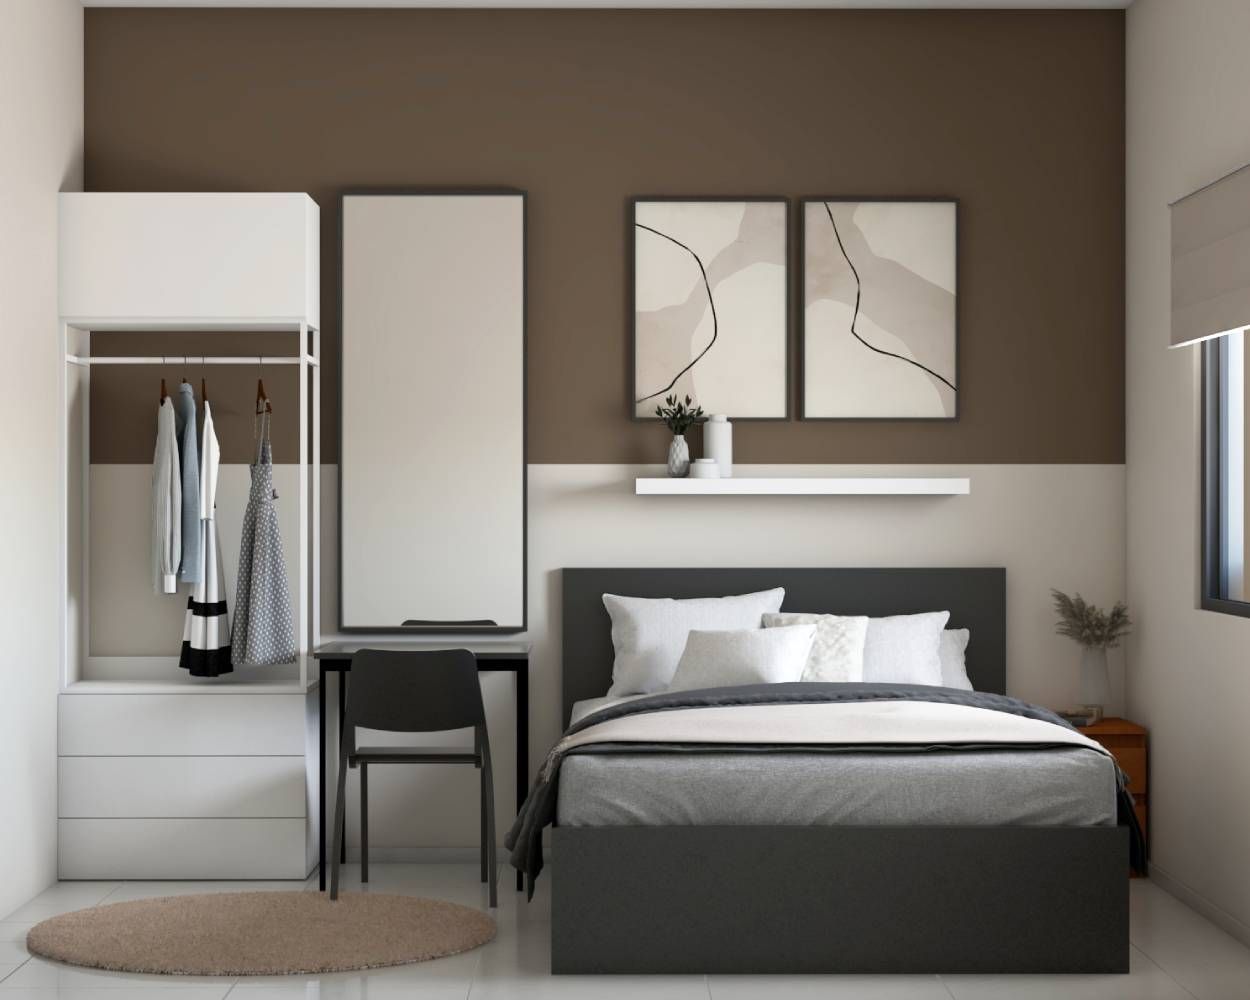 Contemporary Master Bedroom Design With Dual-Toned Brown And Cream Wall Paint